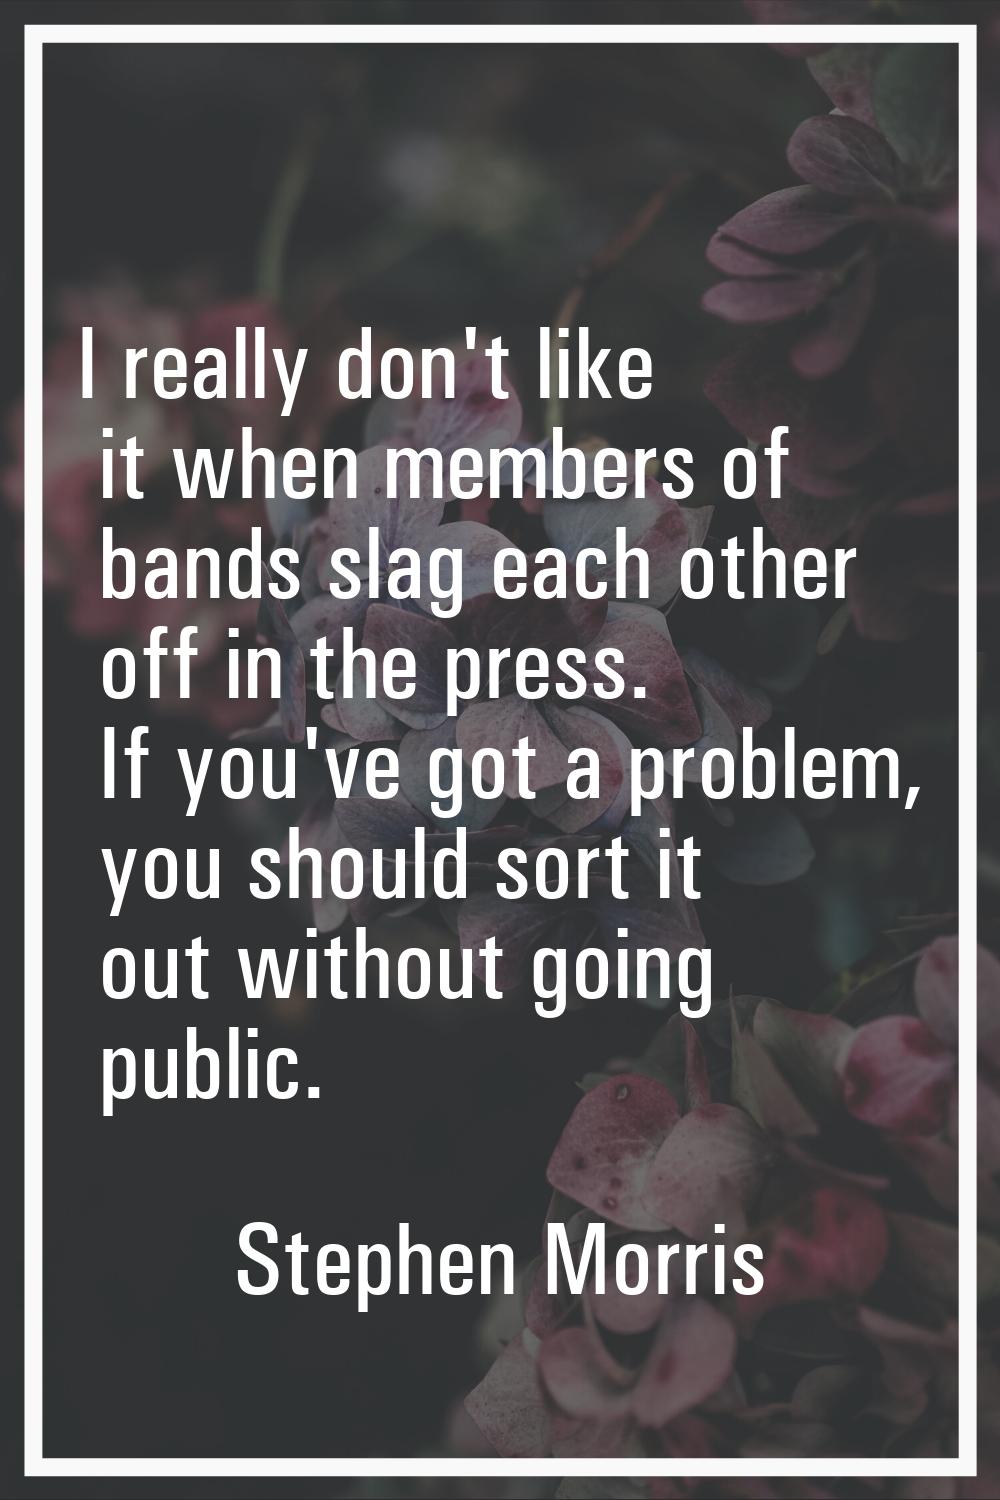 I really don't like it when members of bands slag each other off in the press. If you've got a prob